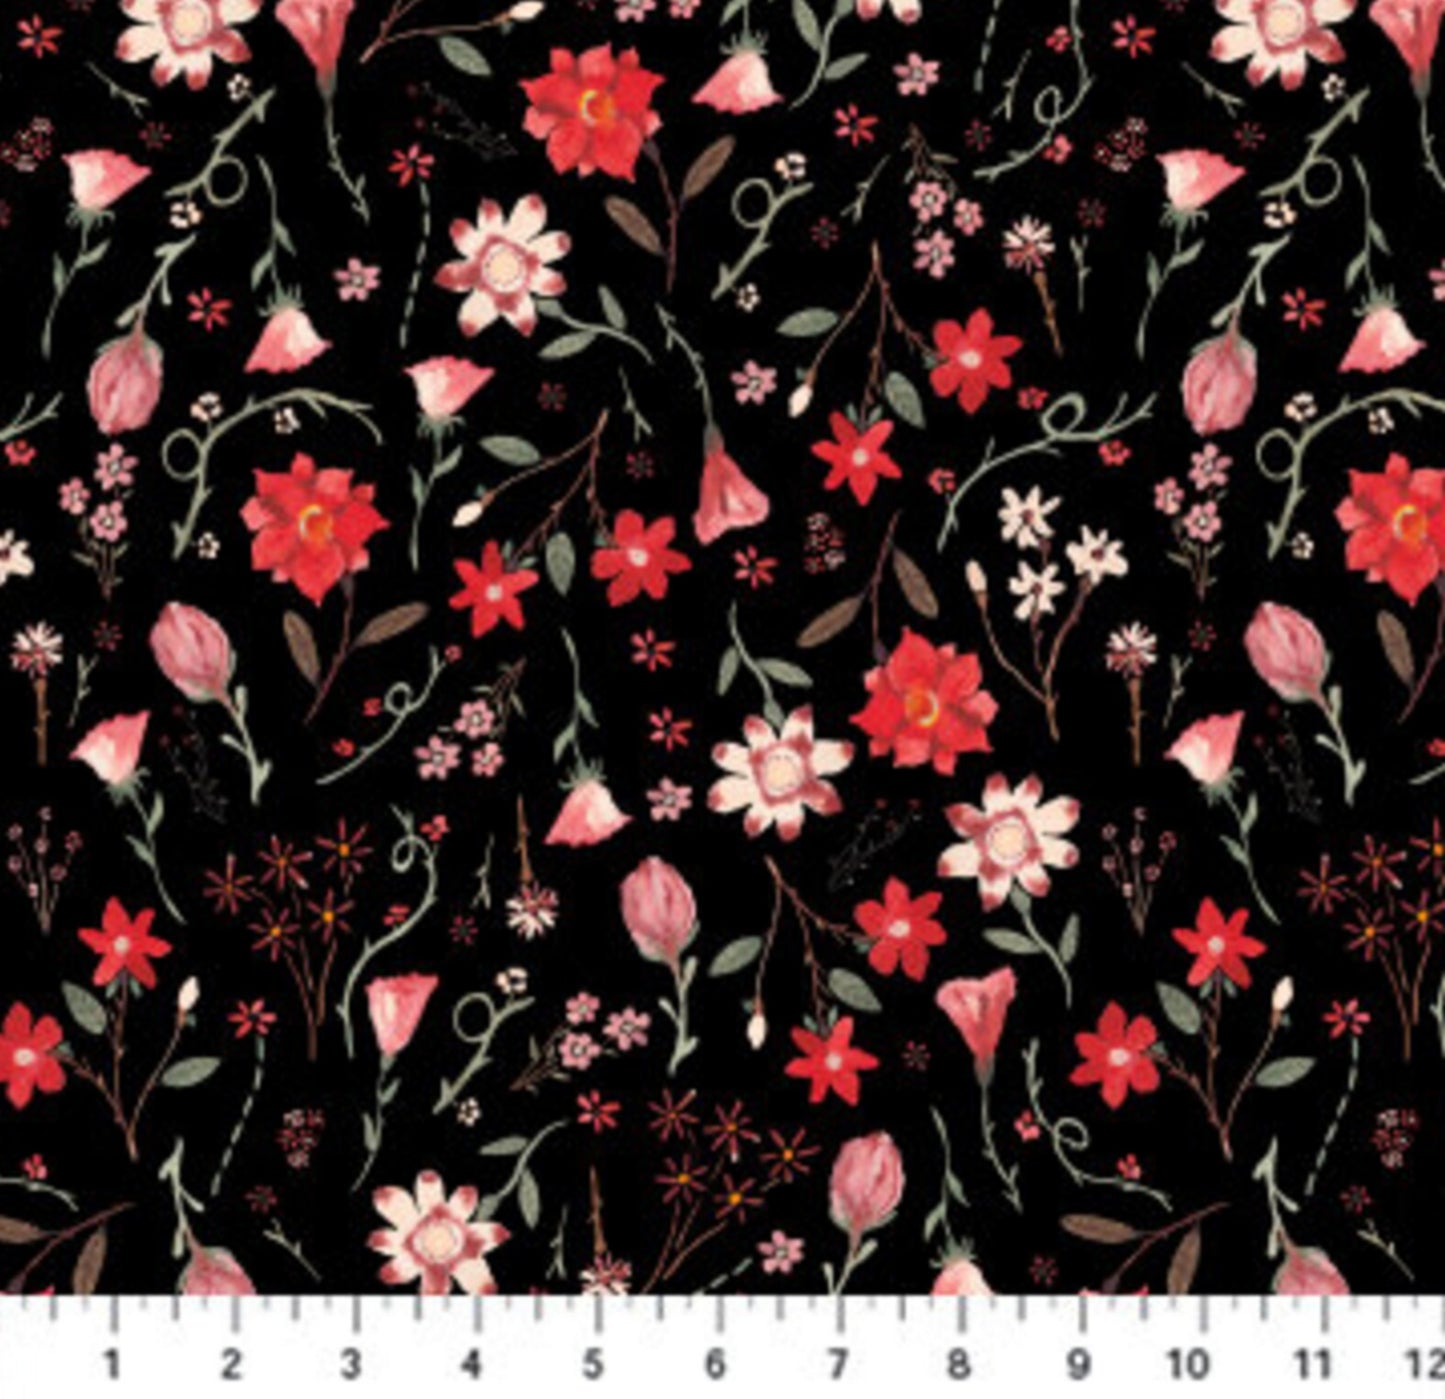 Roses - Roses are Red Collection - 90486-99 - Figo Fabrics